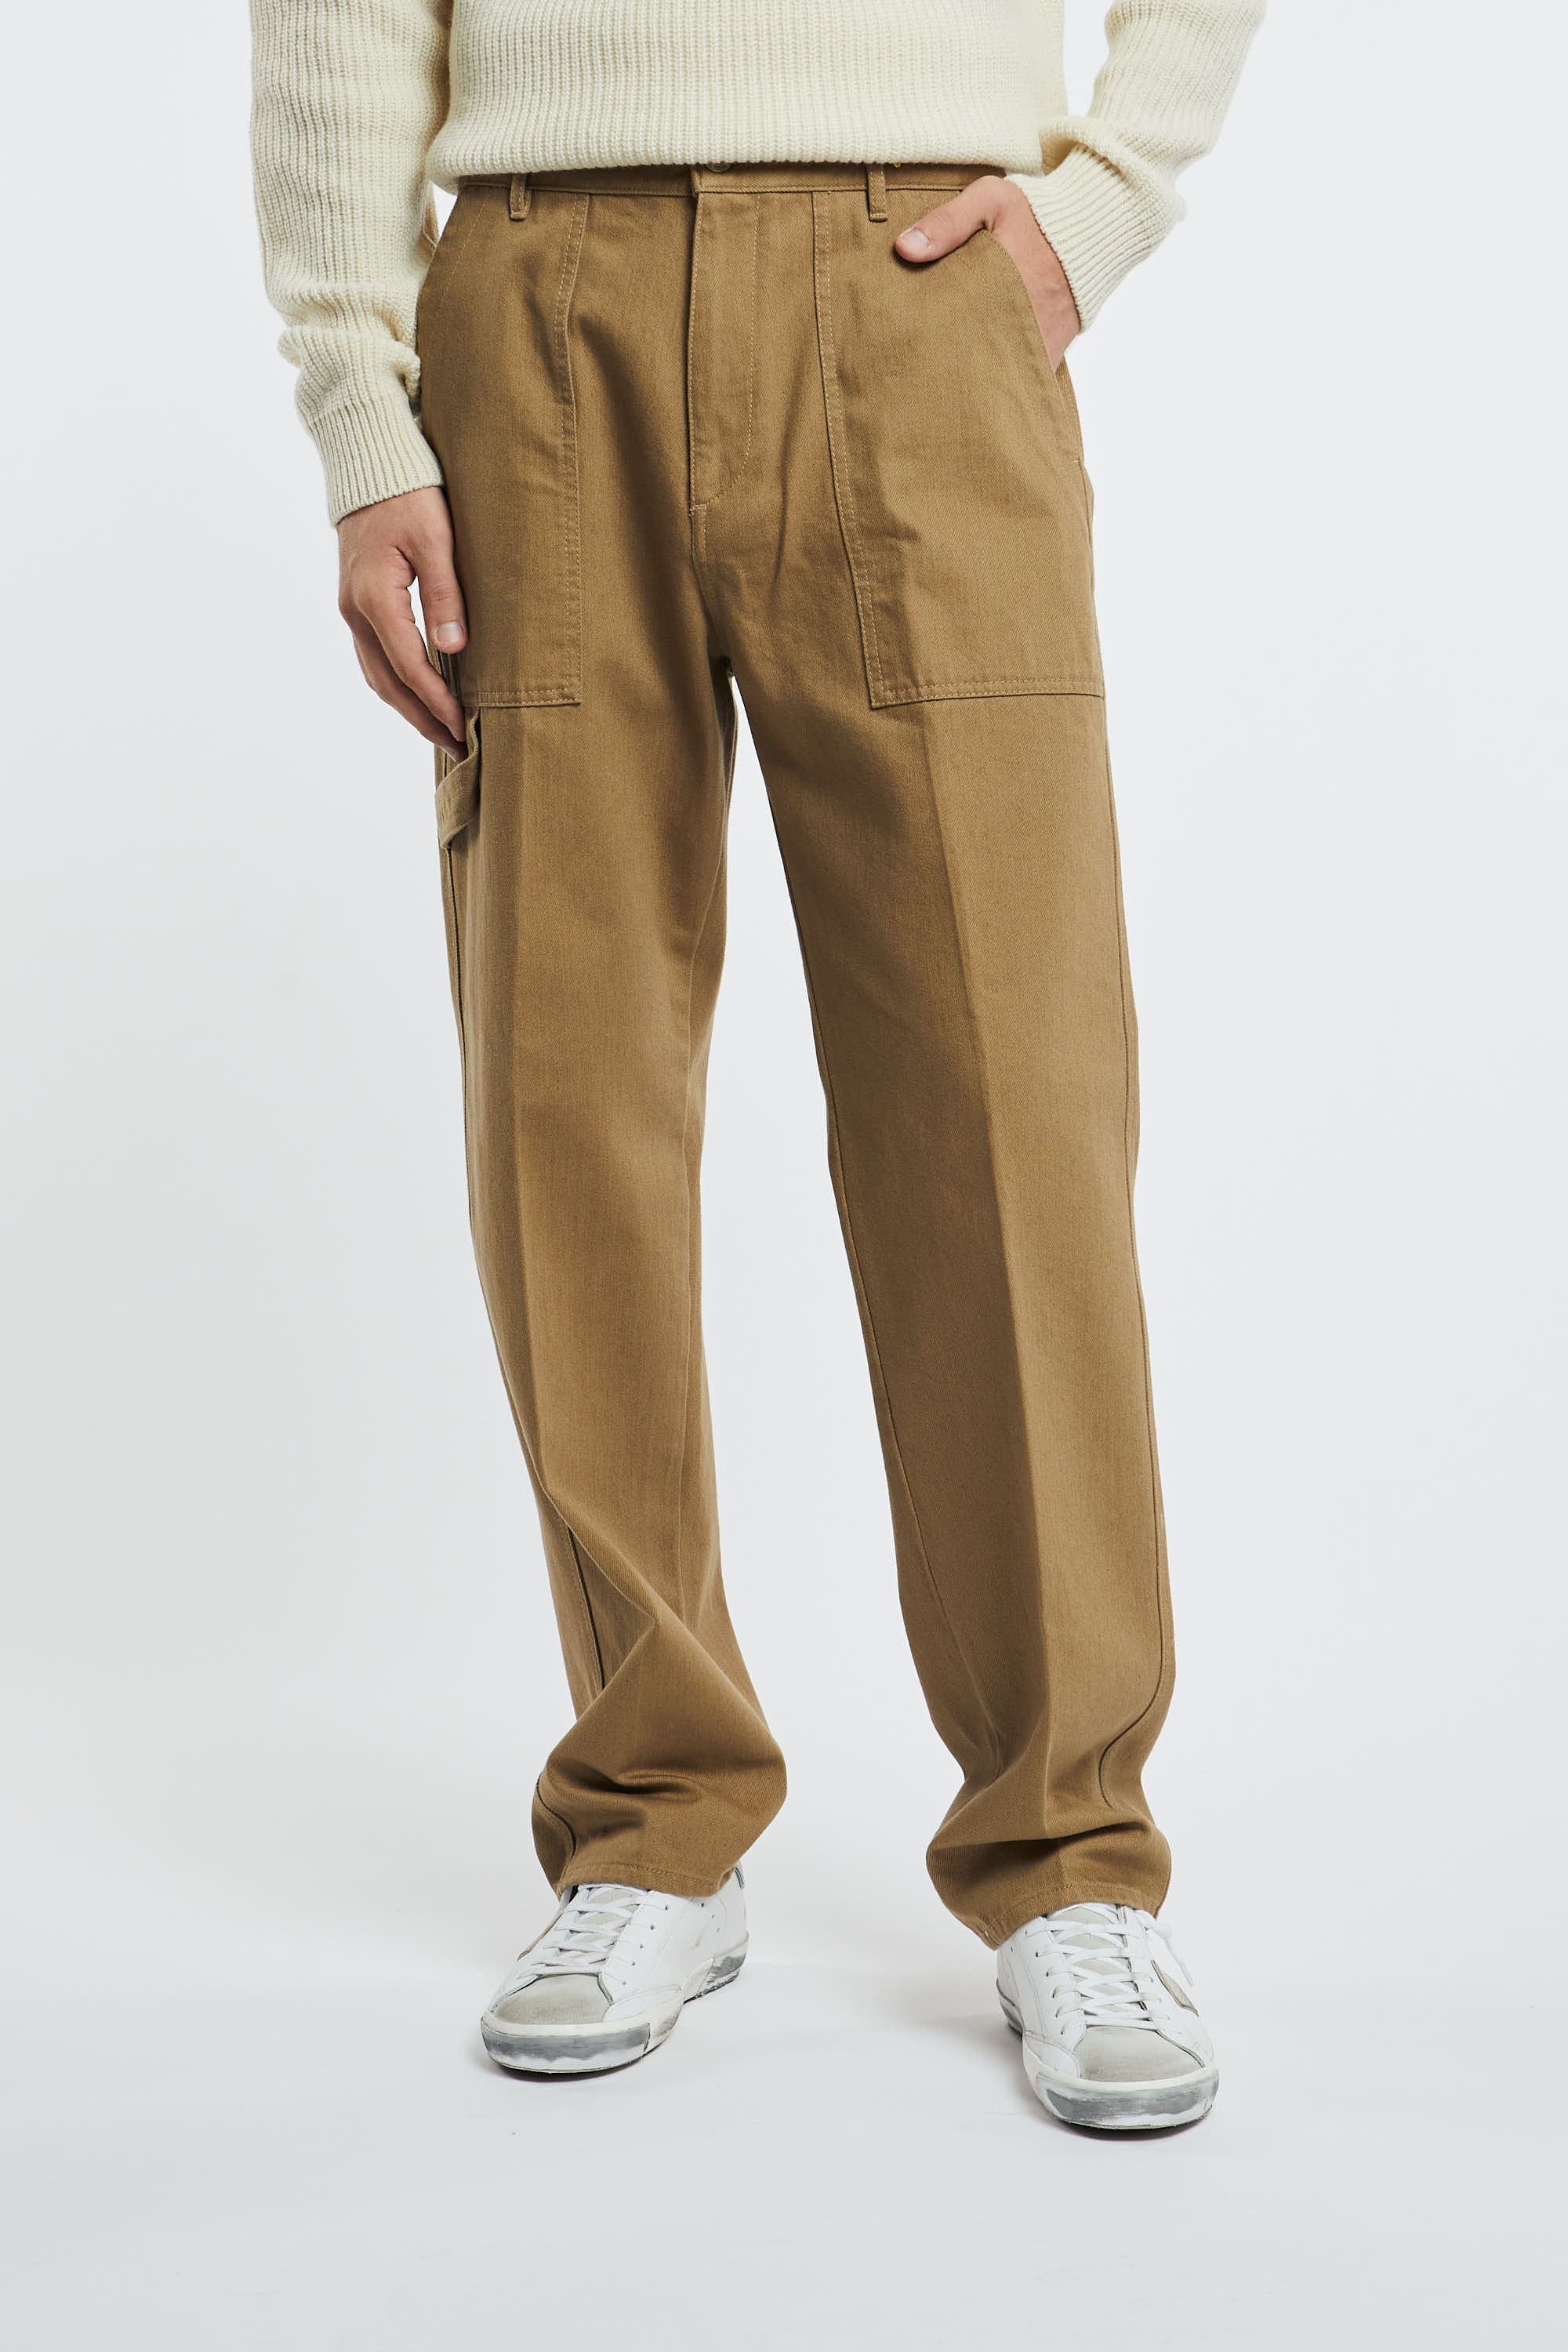 Philippe Model Charles Cotton Pants Beige-1